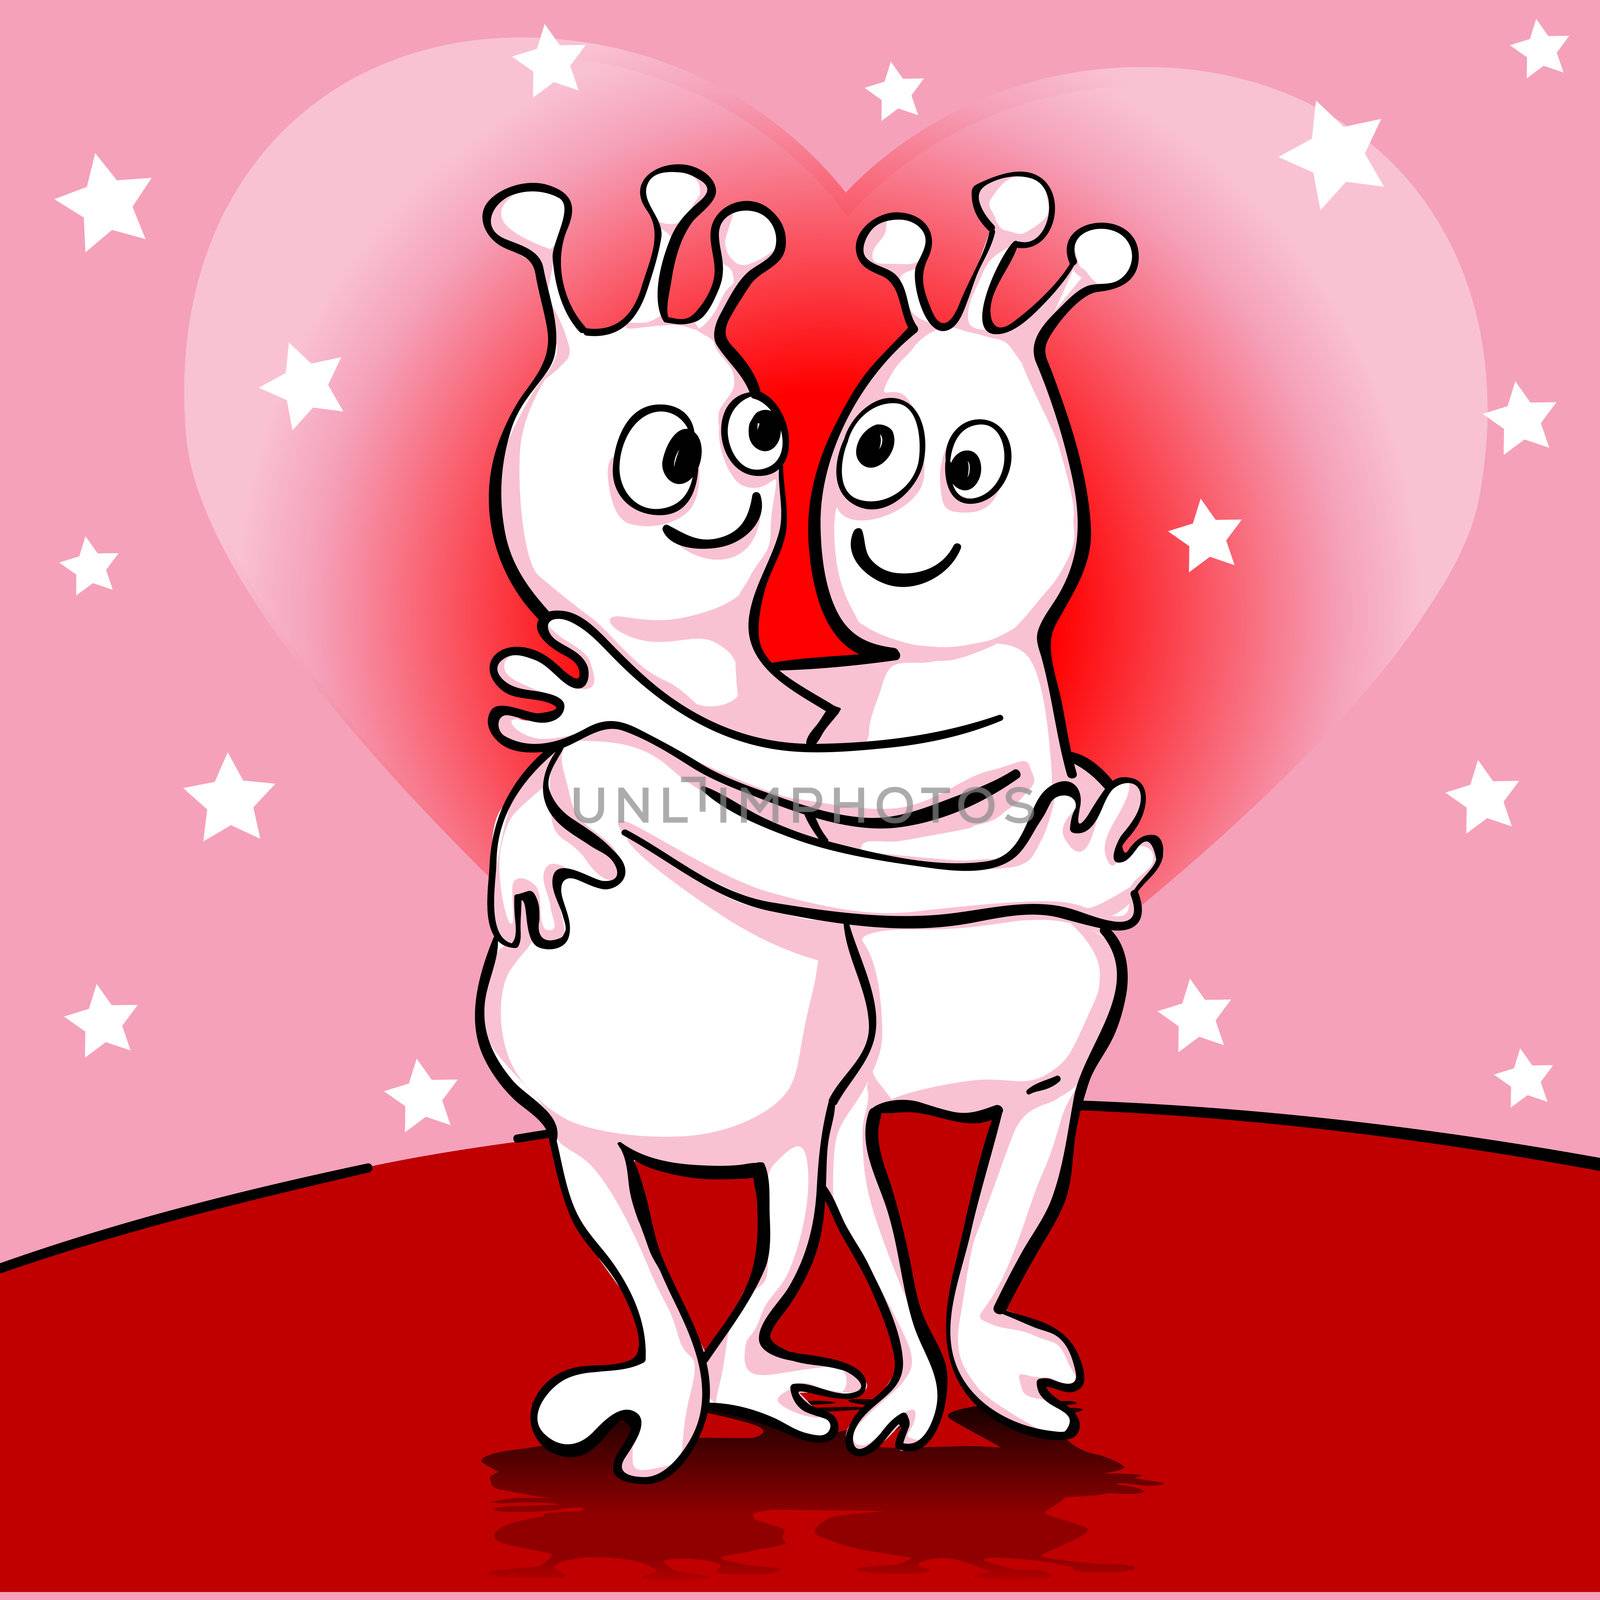 valentine's day and wedding card with aliens in love and magic heart over starry sky 